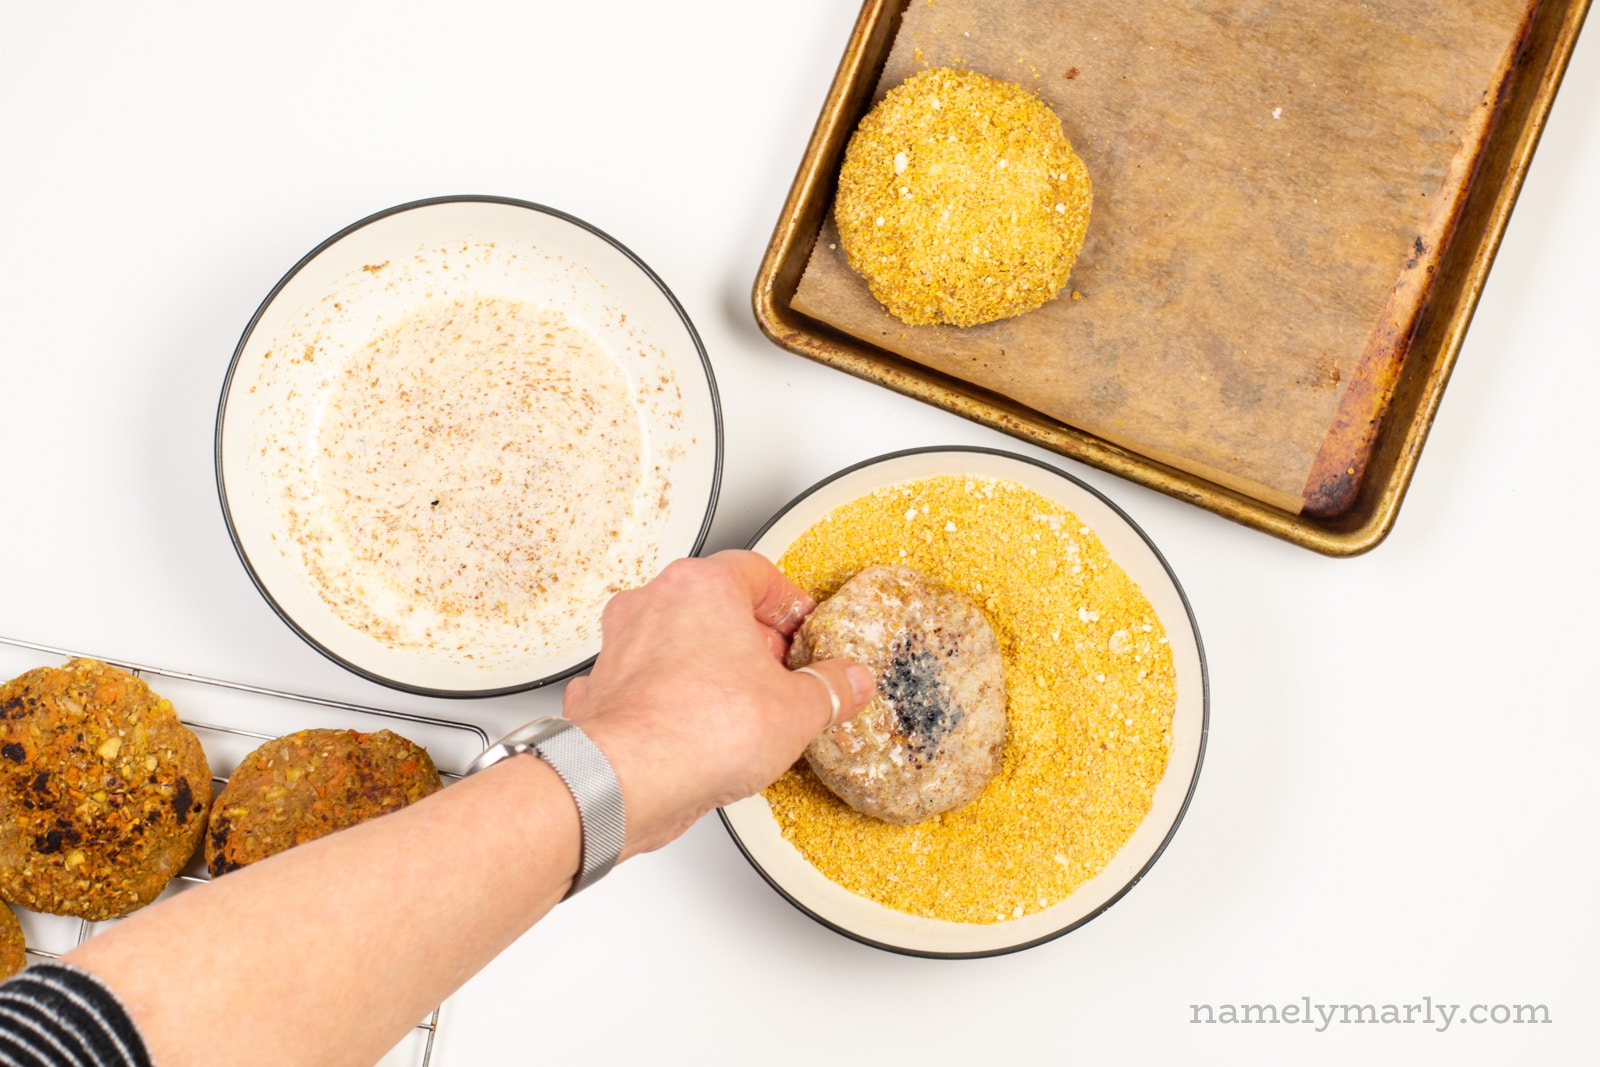 A hand is dipping a veggie patty in a bowl full of bread crumbs. There is a breaded patty on a baking sheet and another bowl for dipping.